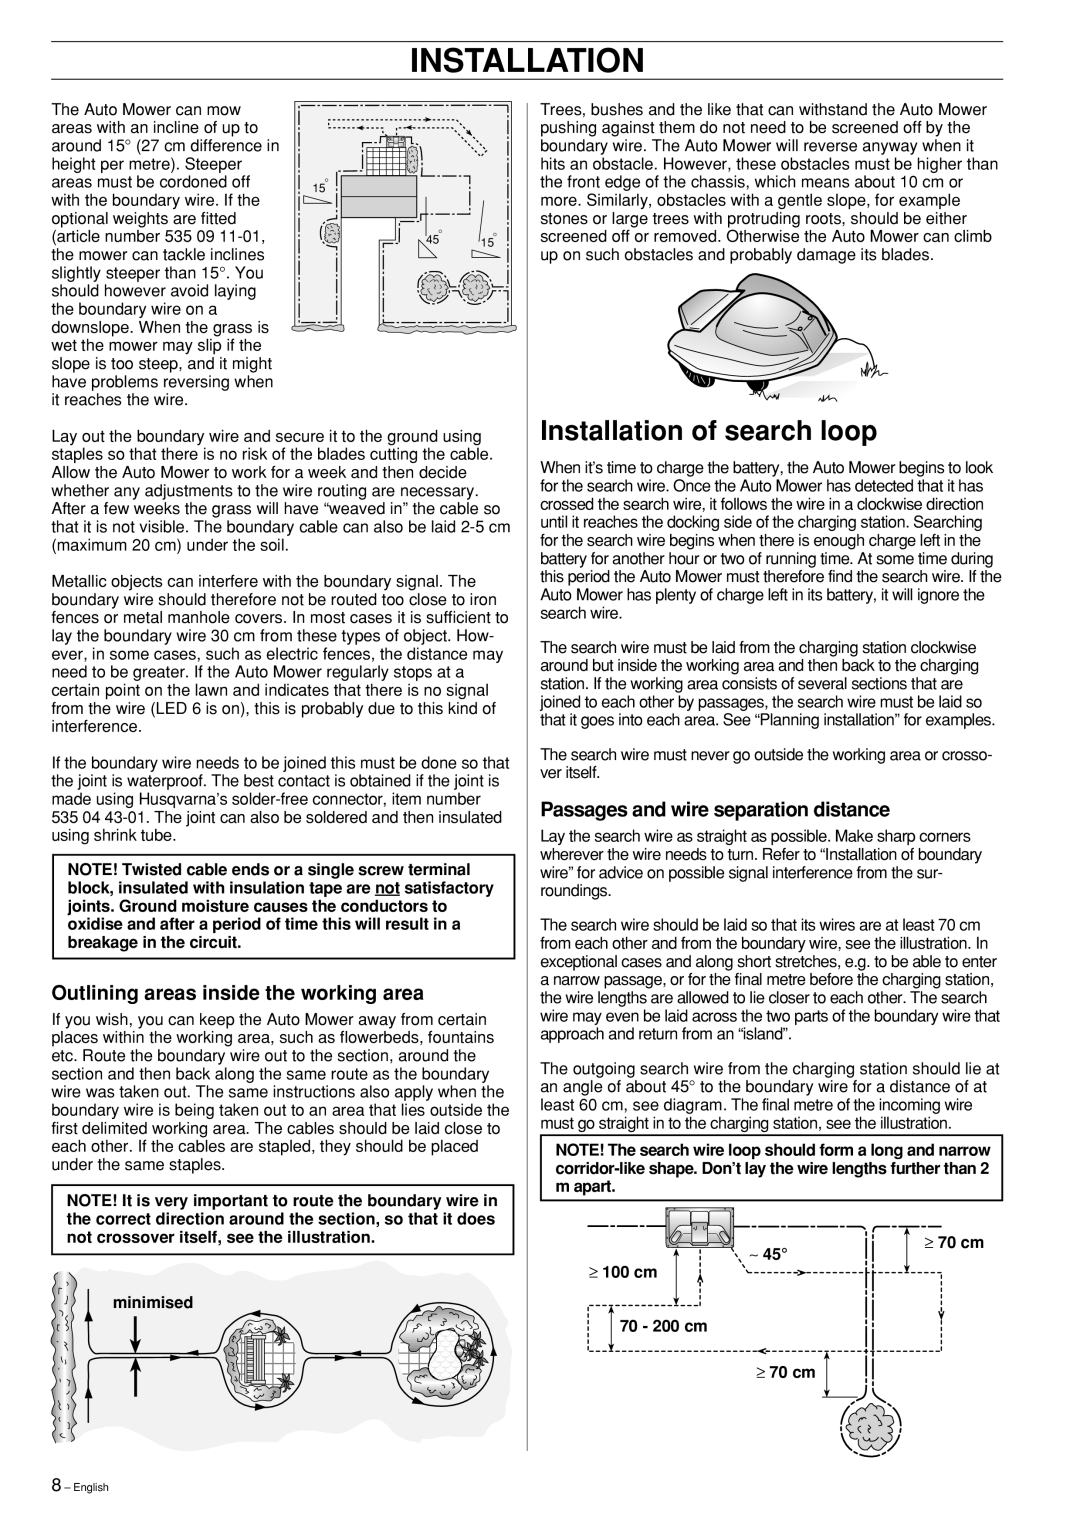 Husqvarna Robotic Lawn Mower manual Installation of search loop, Outlining areas inside the working area 